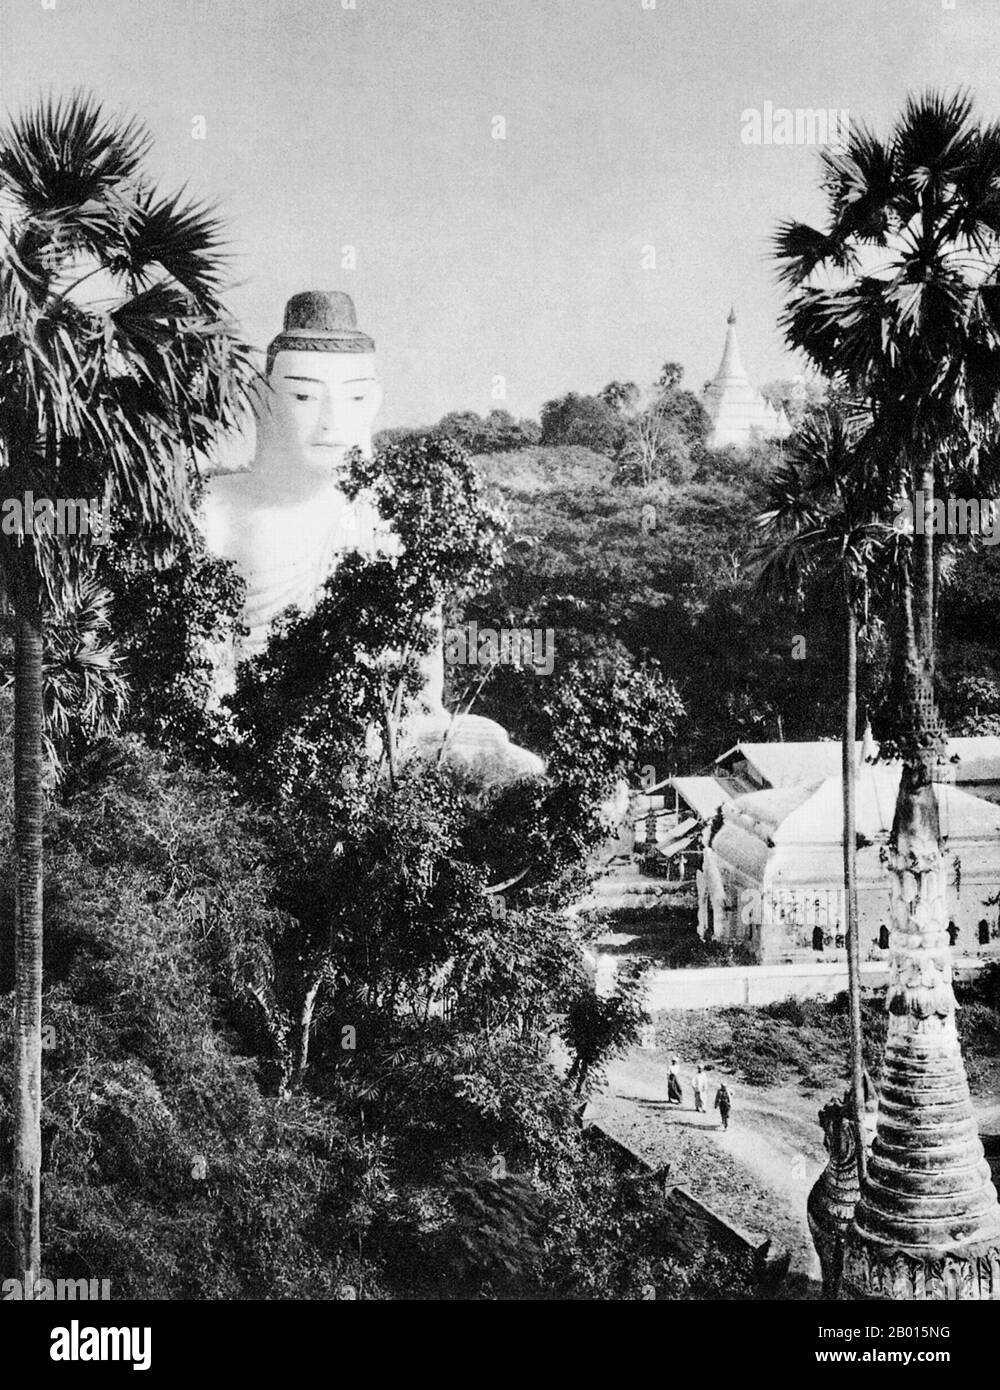 Burma/Myanmar: A Buddha statue in Prome, lower Burma, c. 1920s.  Legend attributes the first Buddhist doctrine in Burma to 228 BCE when Sohn Uttar Sthavira, one of the royal monks to Emperor Ashoka the Great of India, came to the country with other monks and sacred texts. However, the era of Buddhism truly began in the 11th century after King Anawrahta of Pagan (Bagan) was converted to Theravada Buddhism. Today, 89% of the population of Burma is Theravada Buddhist.  Prome, renamed Pyay, is a town in Pegu (Bago) Division in lower Burma, located on the Irrawaddy (Ayeyarwady) River. Stock Photo